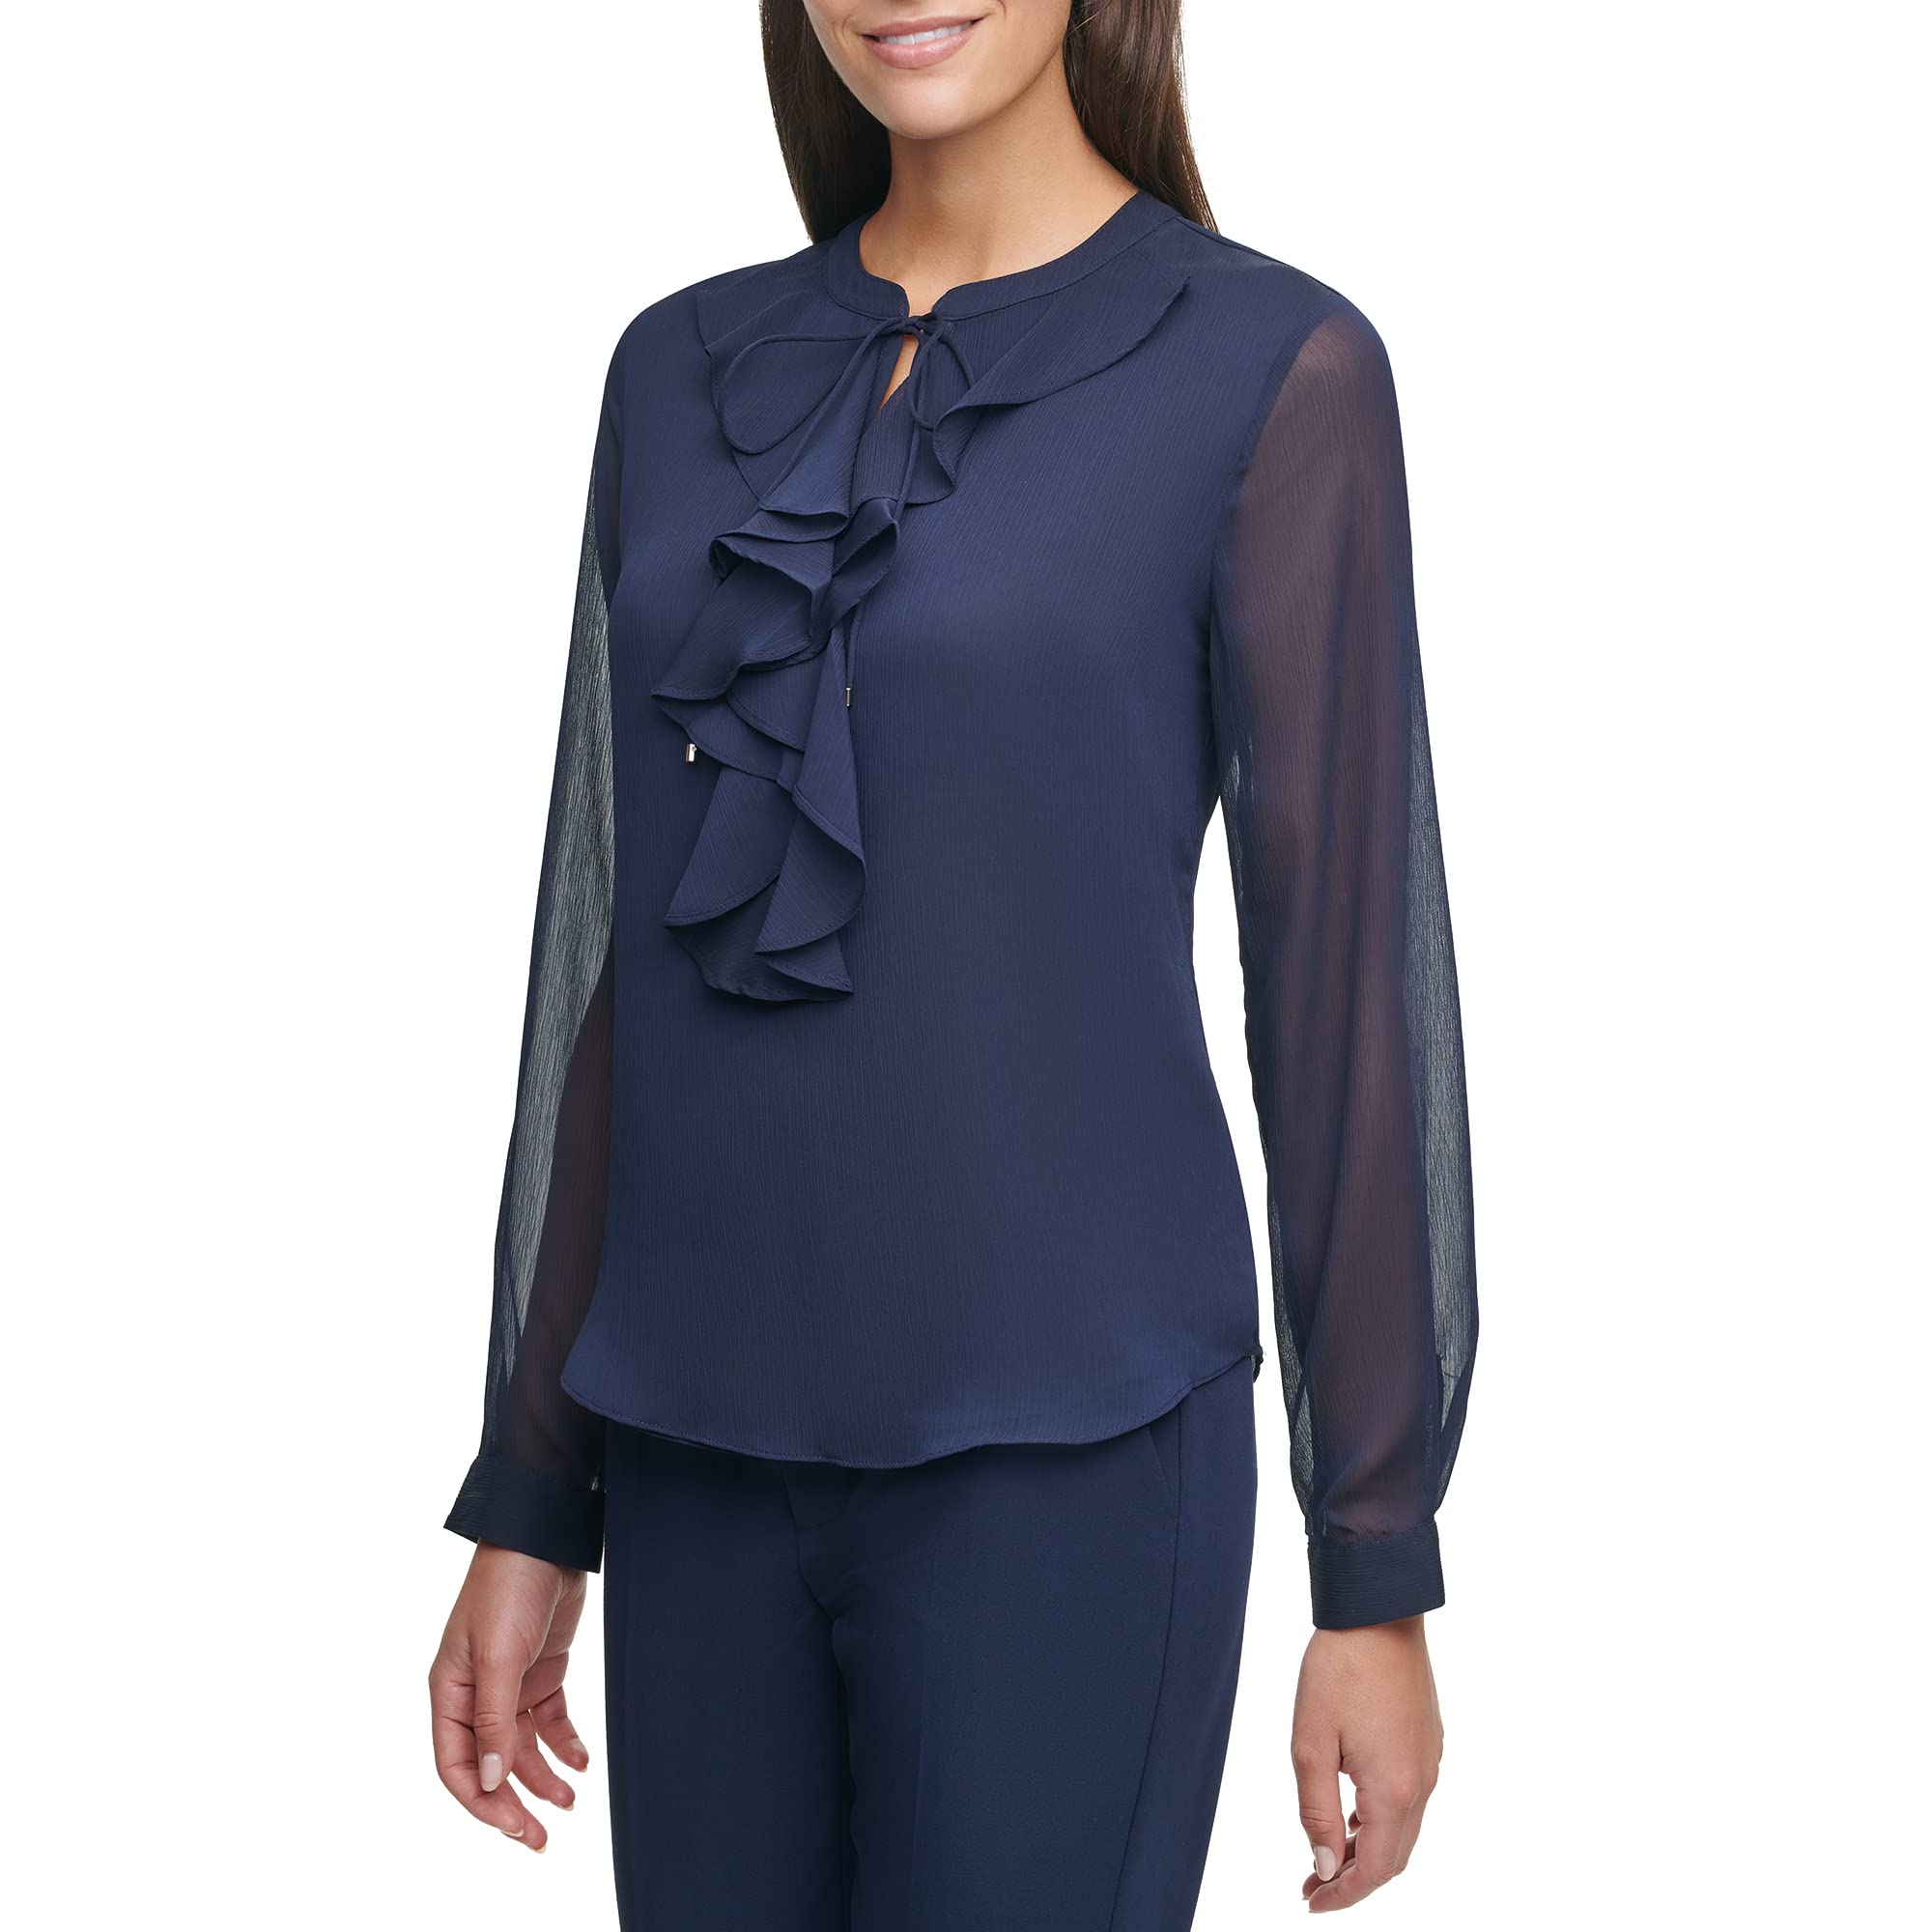 Tommy Hilfiger Women's Classic Long Sleeve Ruffle Front Blouse